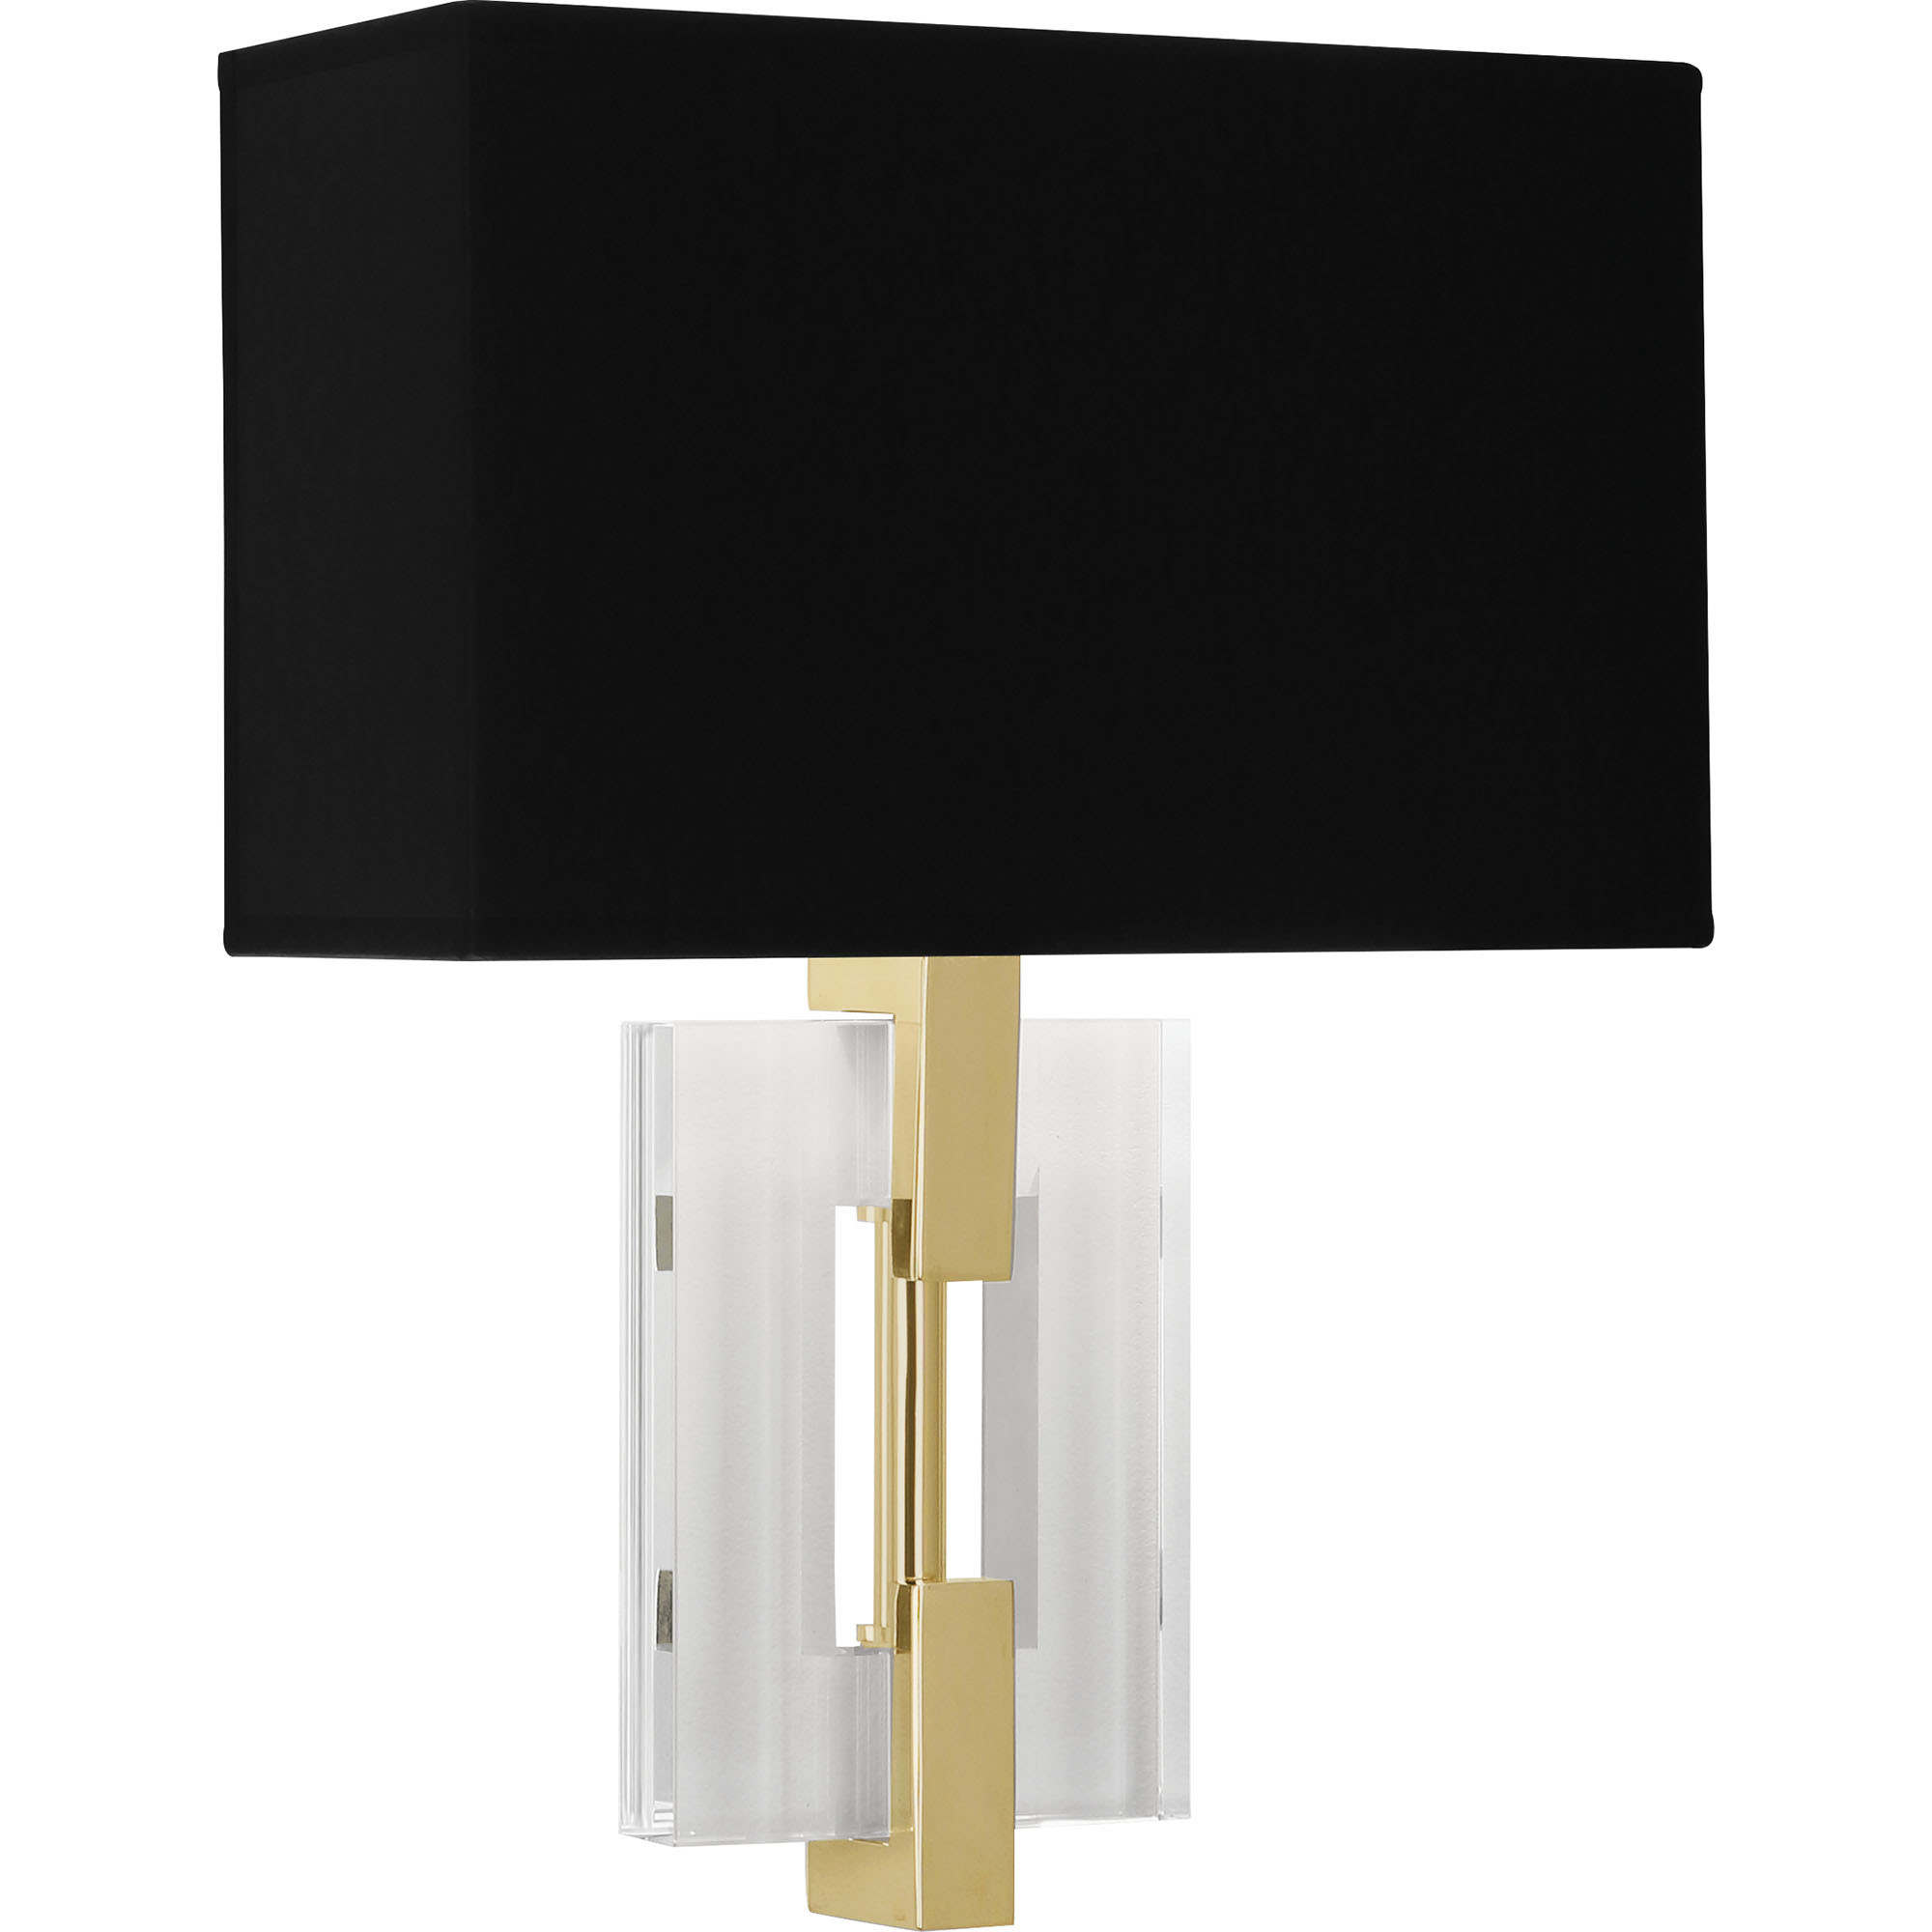 Lincoln Wall Sconce Style #1009B